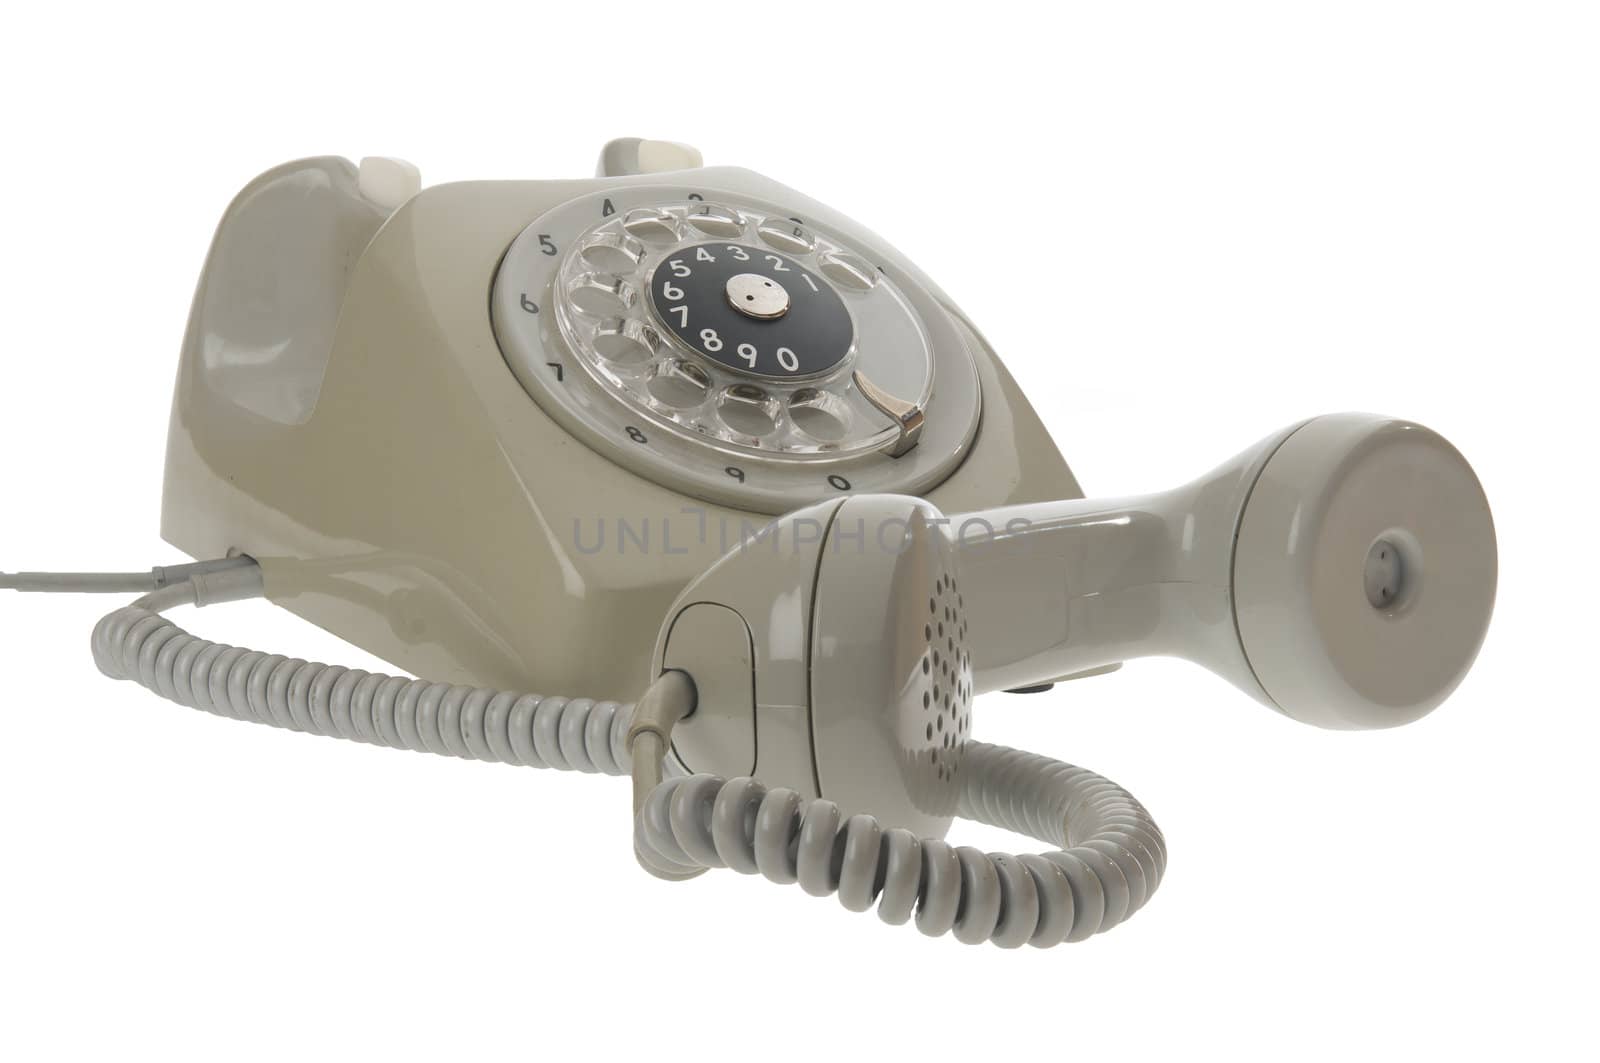 Old vintage rotary style telephone - handset off by jogvan